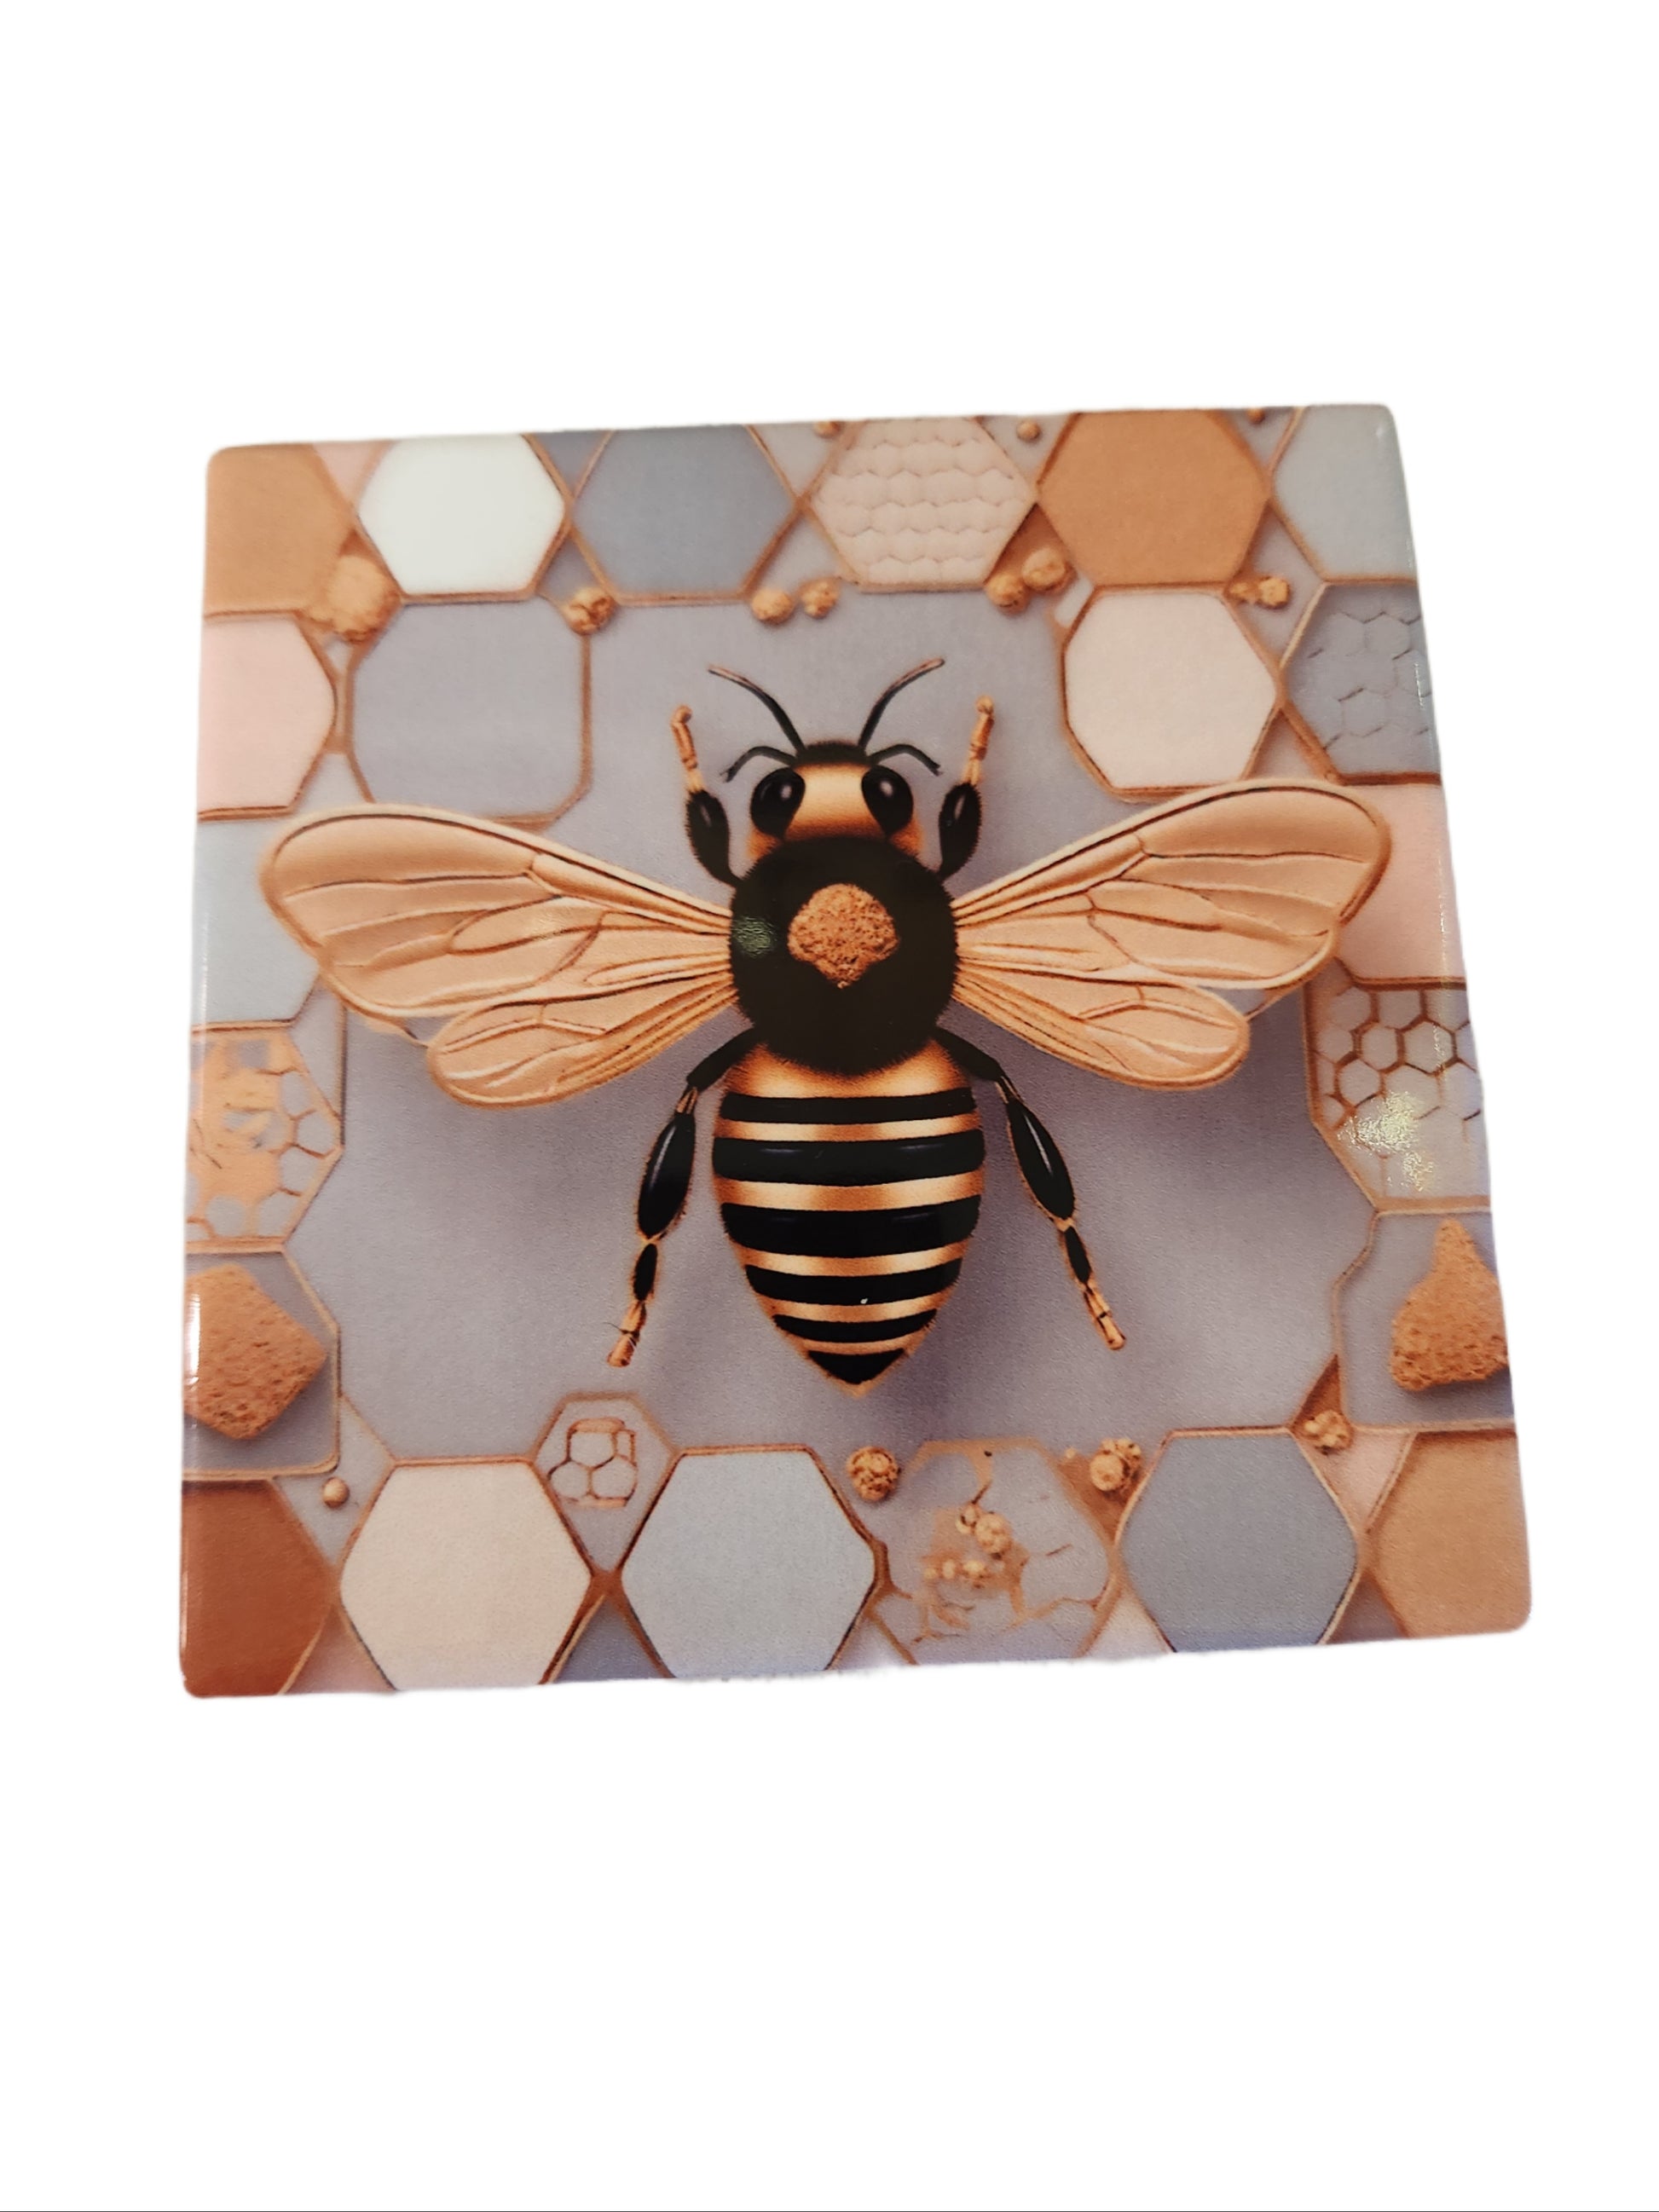 3 style Bumble Bee 4 in Table Coasters - ALittleDisAnDat.com